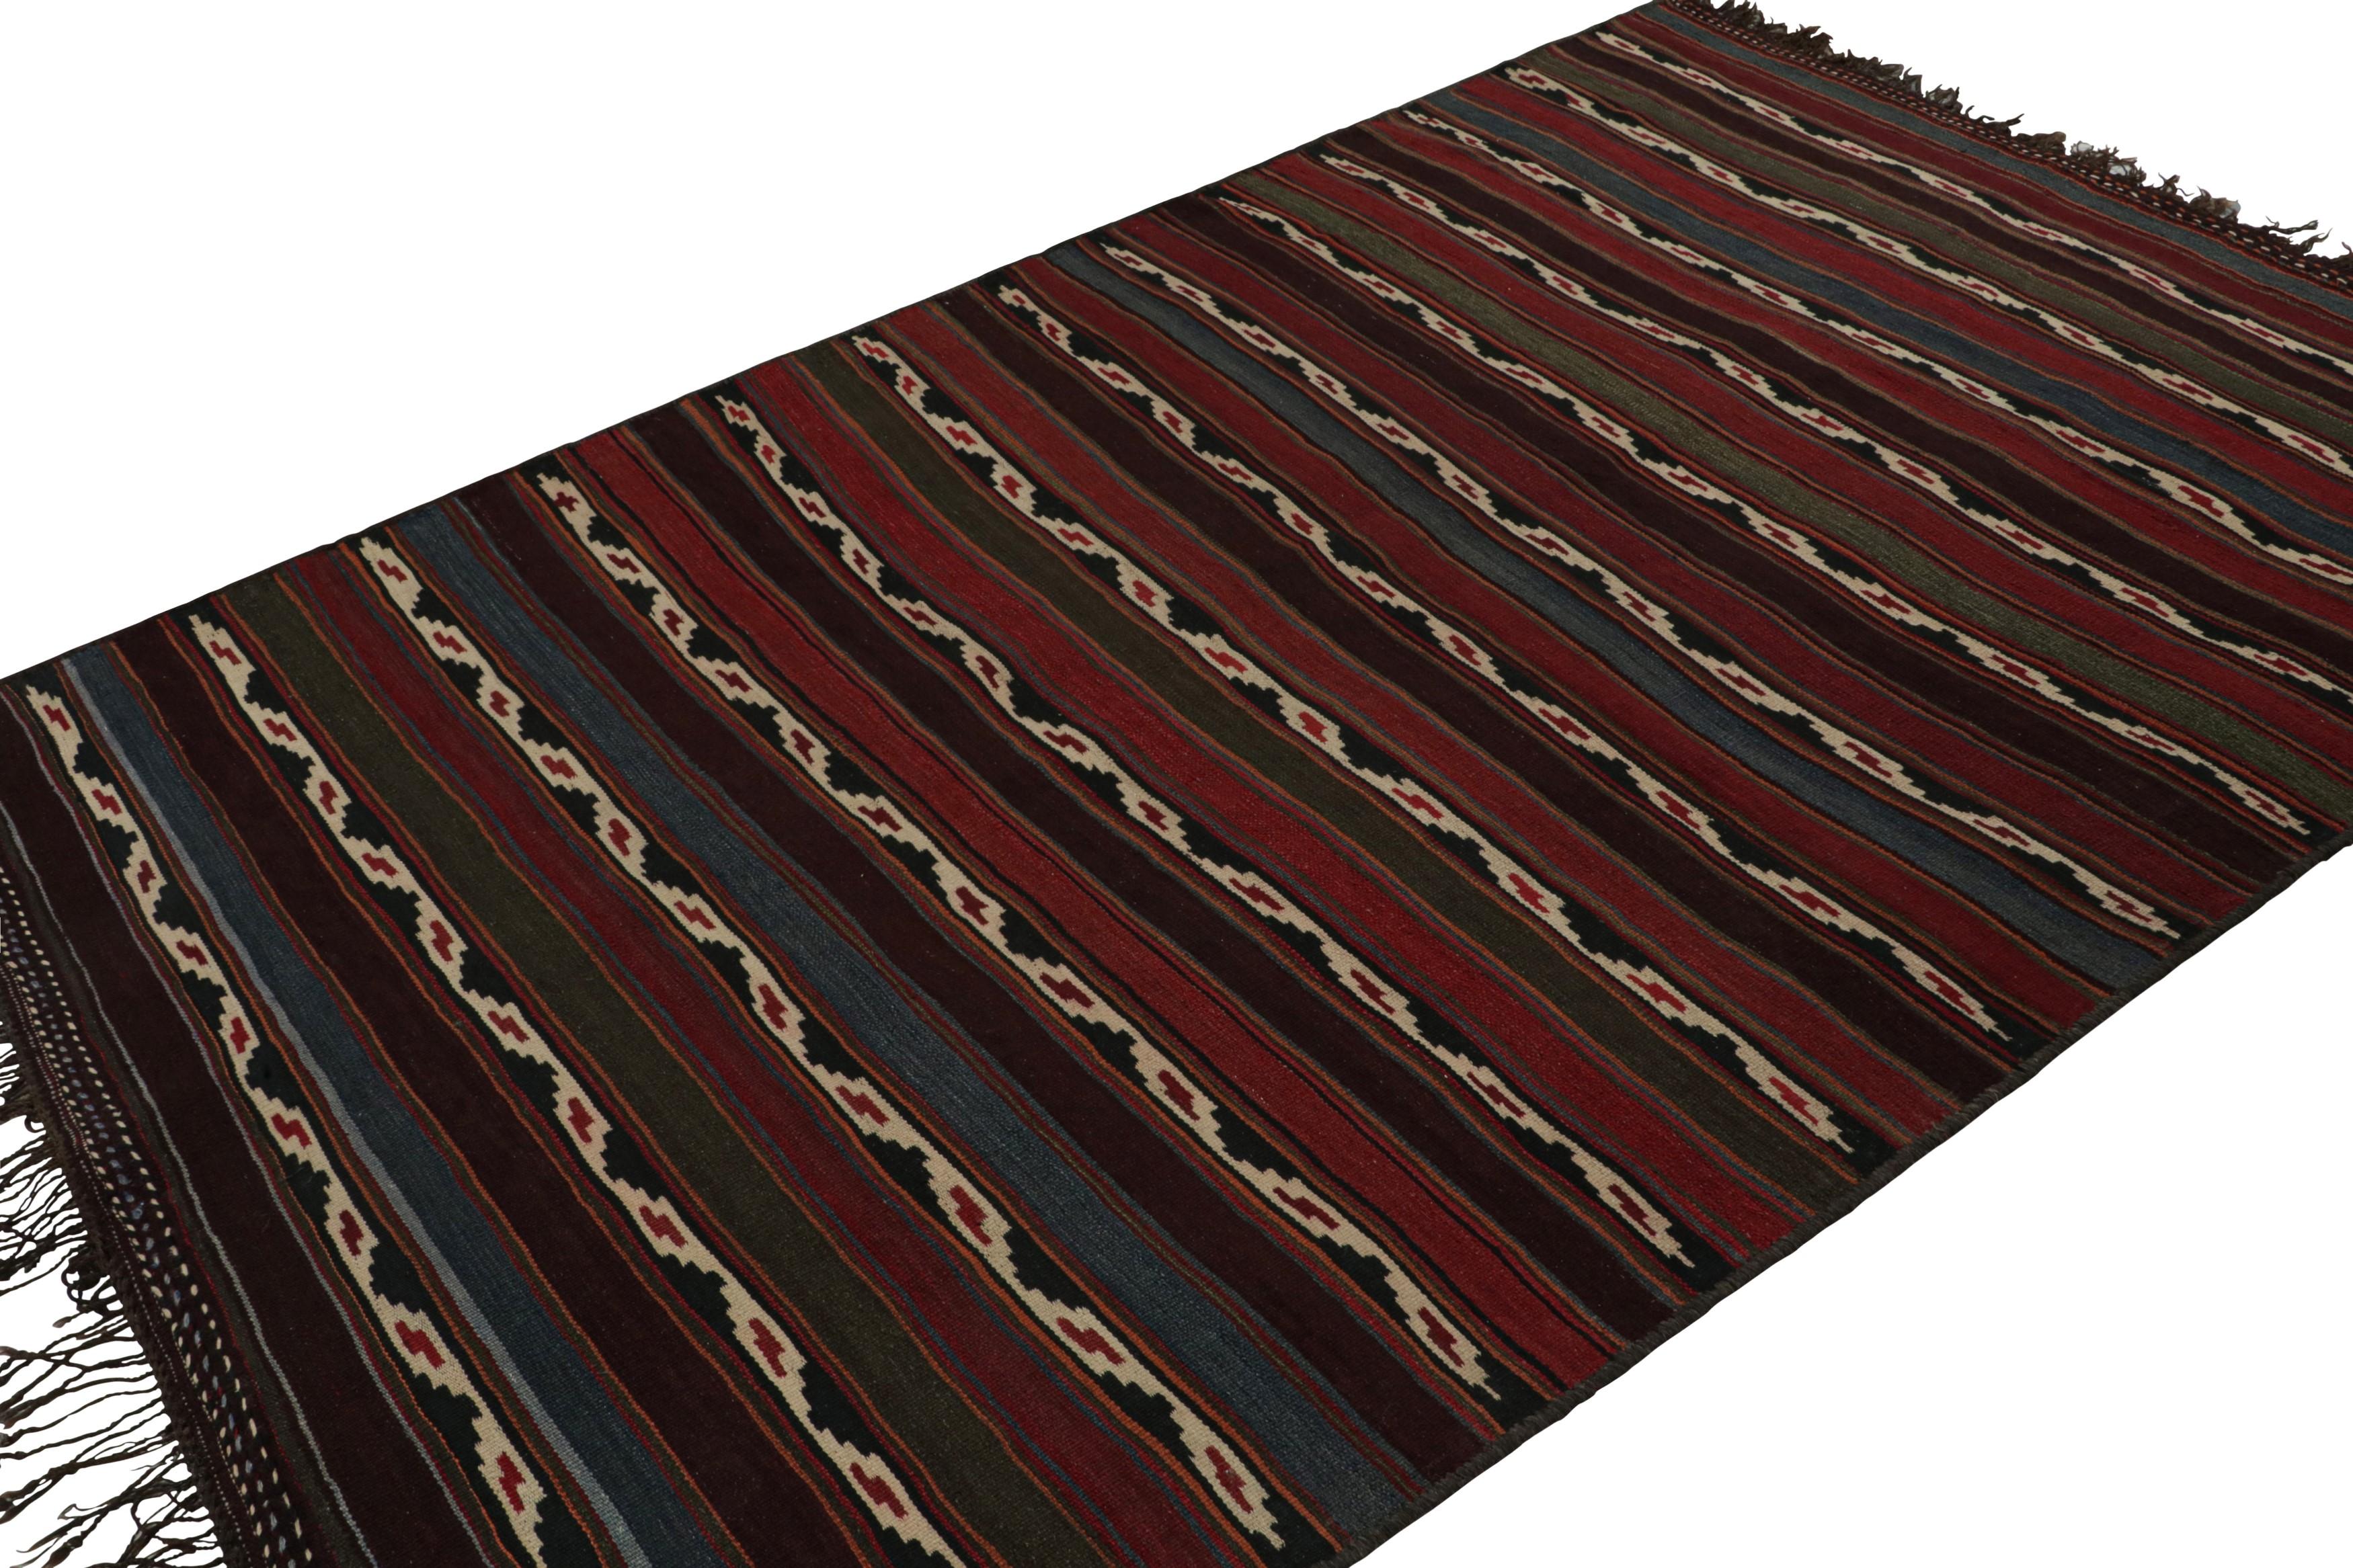 Handwoven in wool, circa 1950-1960, this 6x9 vintage Afghan tribal kilim rug, with red and blue stripes and teal notes, featuring off-white geometric patterns is a simple yet a very personal piece. 

On the Design: 

Featuring repetitive horizontal